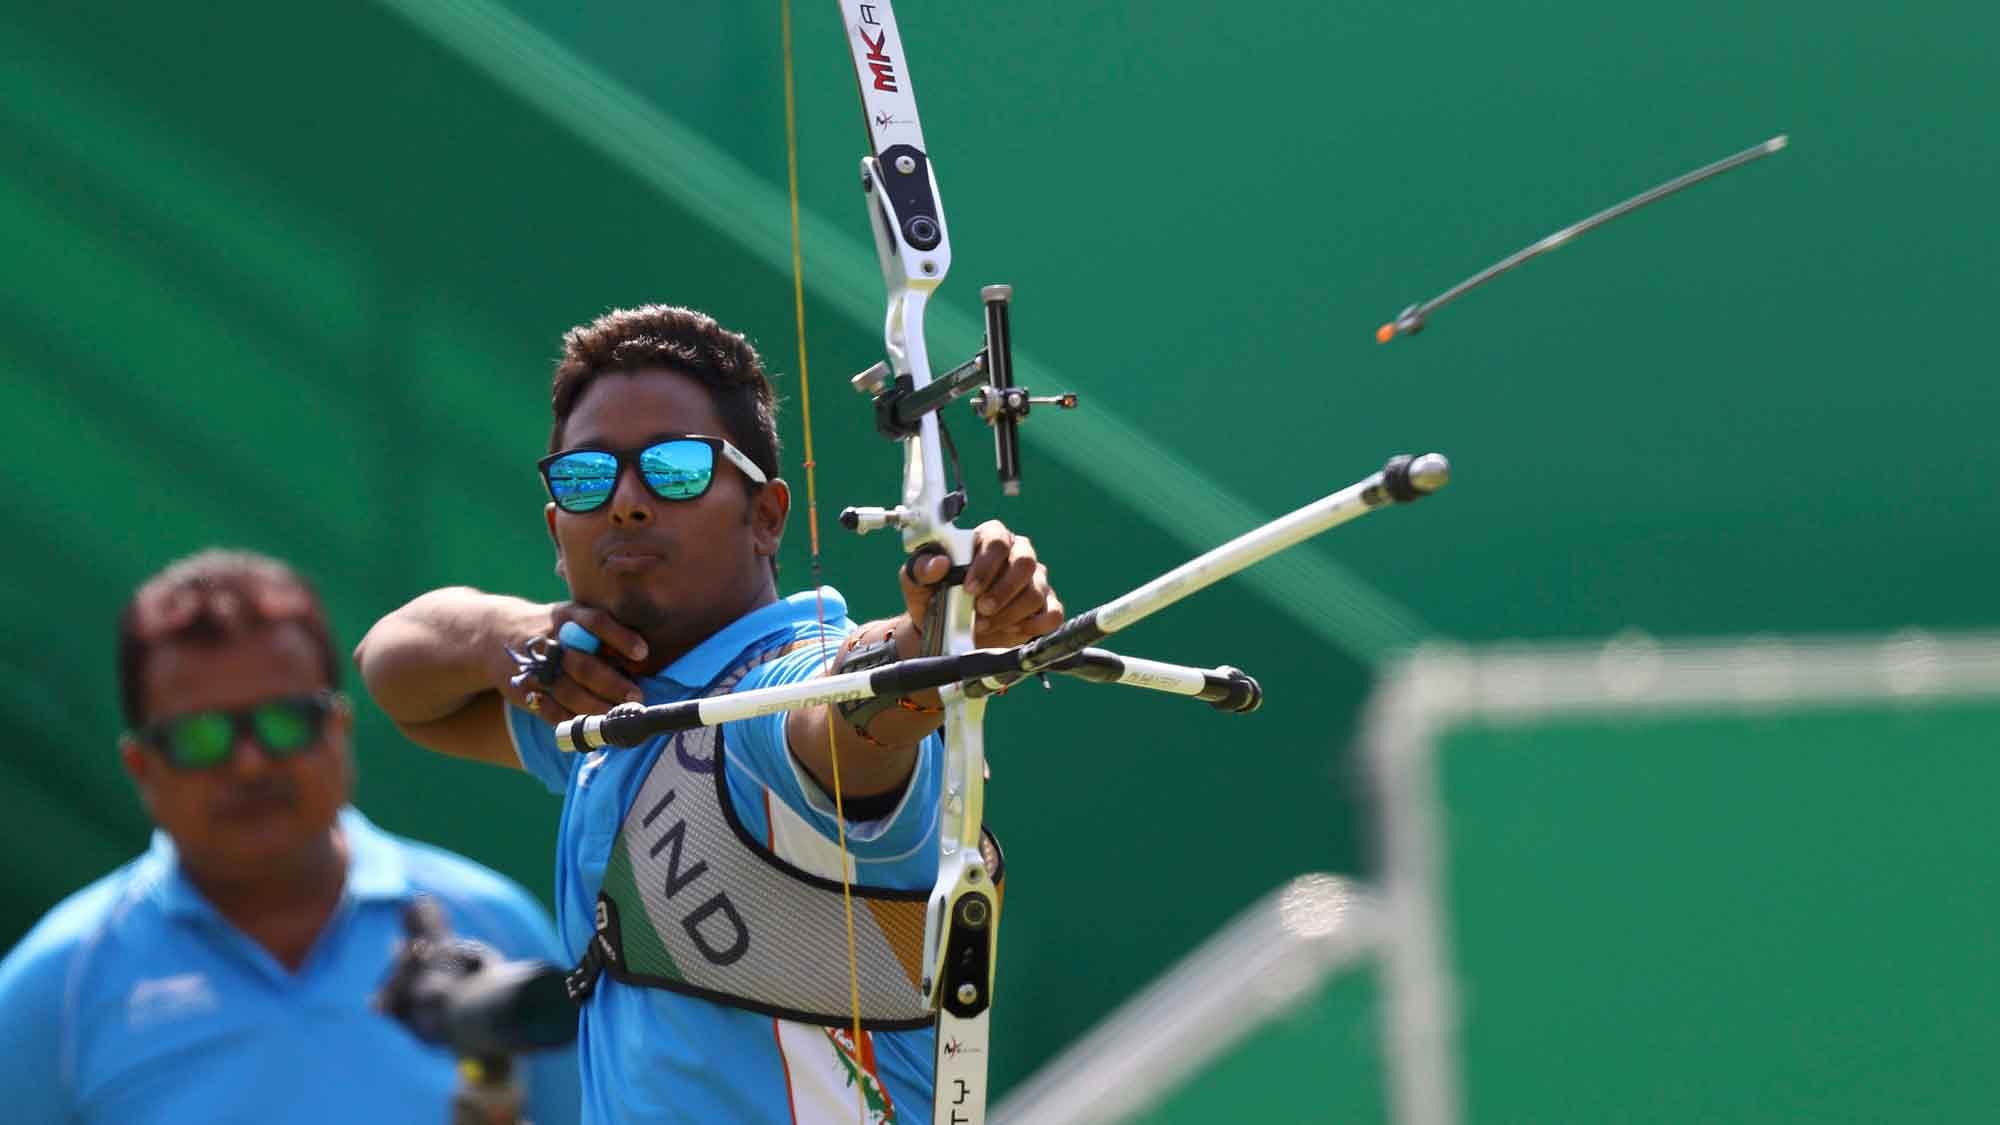 File photo of Indian archer Atanu Das. The World Archery is willing to lift Archery Association of India’s suspension “conditionally”.